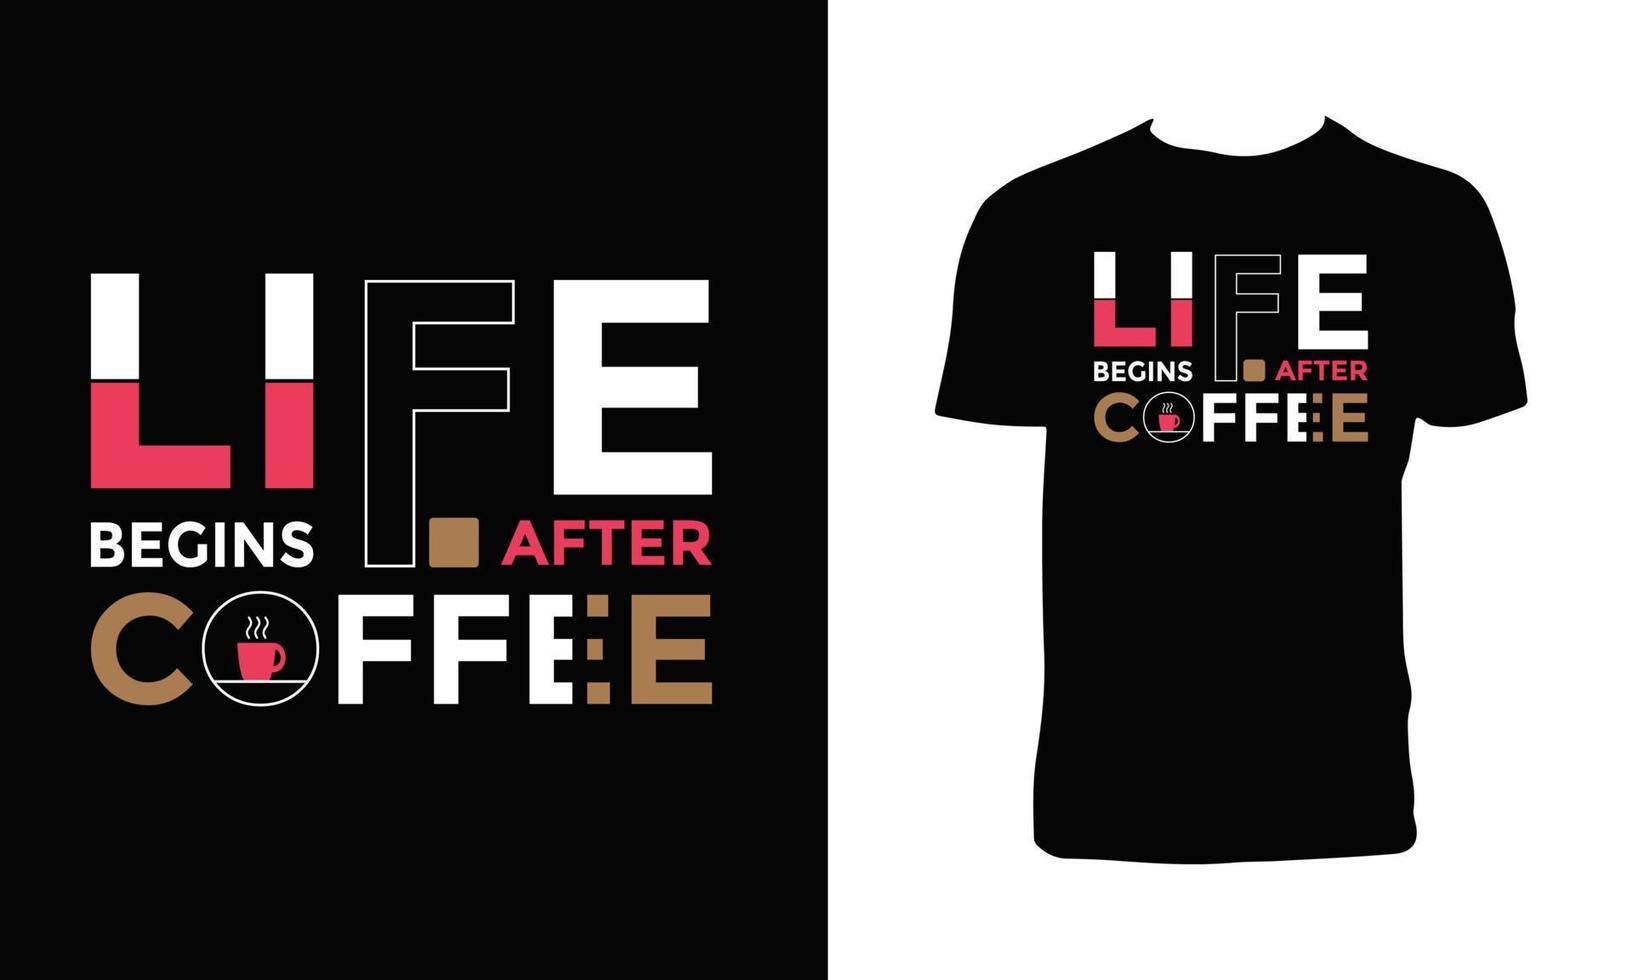 Life begins after coffee typography t shirt design. vector